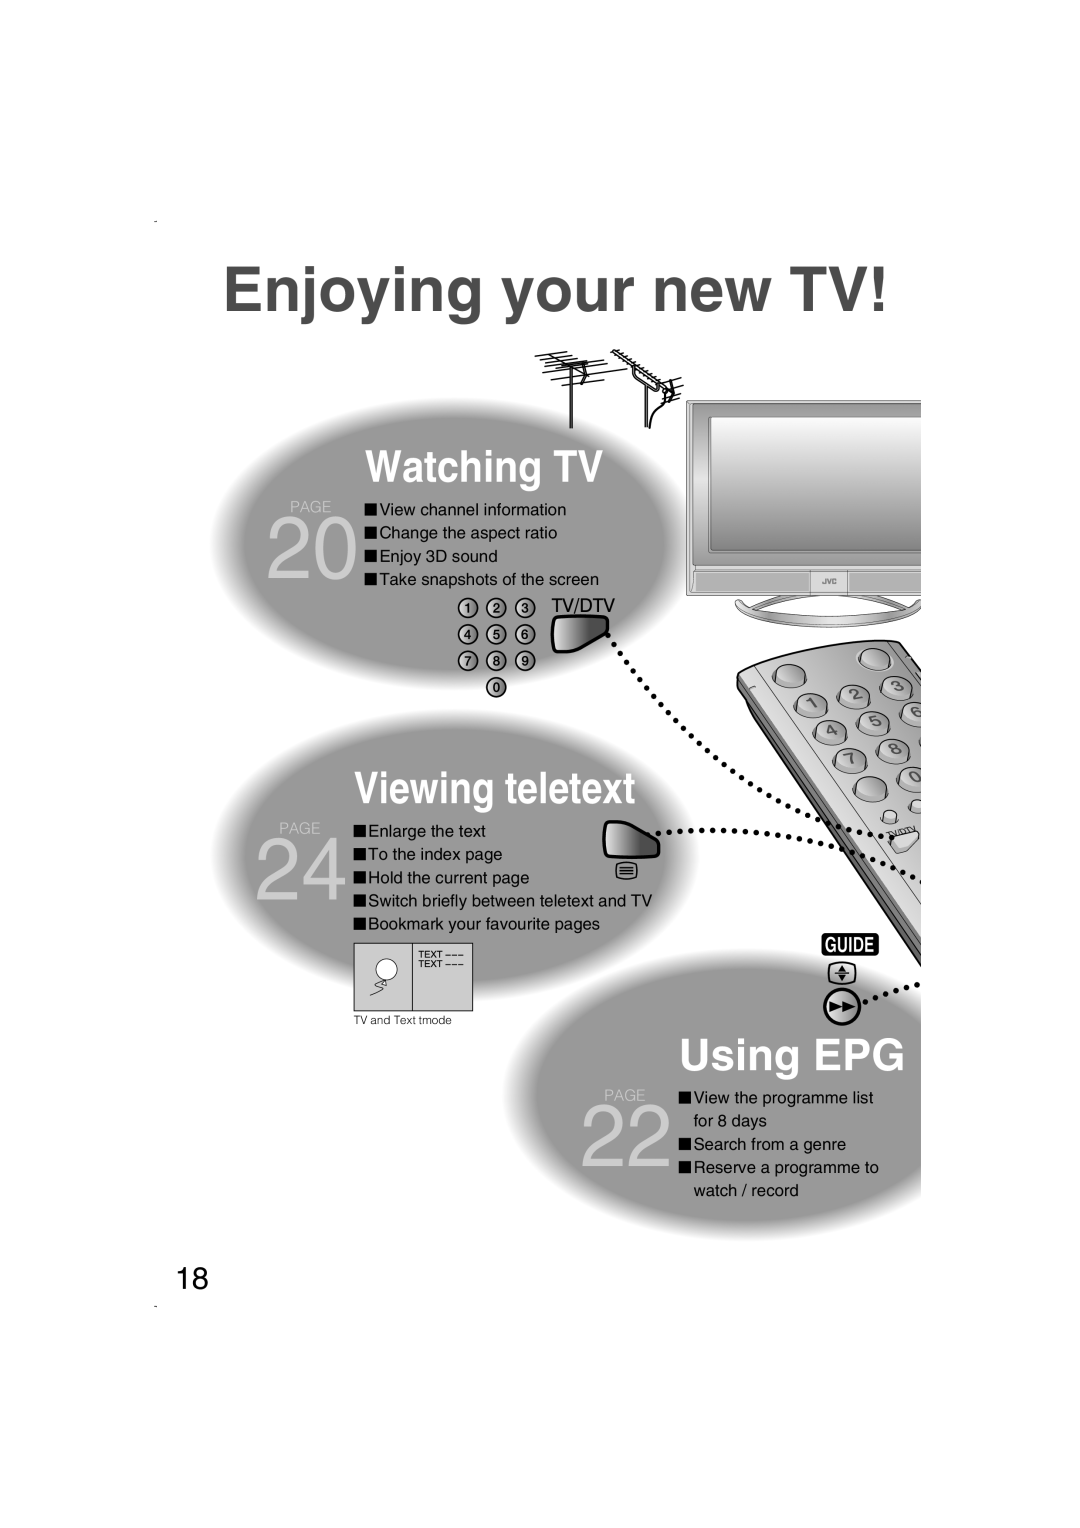 JVC LCT1847-001B-U Enjoying your new TV, Watching TV, Viewing teletext, Using EPG, View channel information, for 8 days 